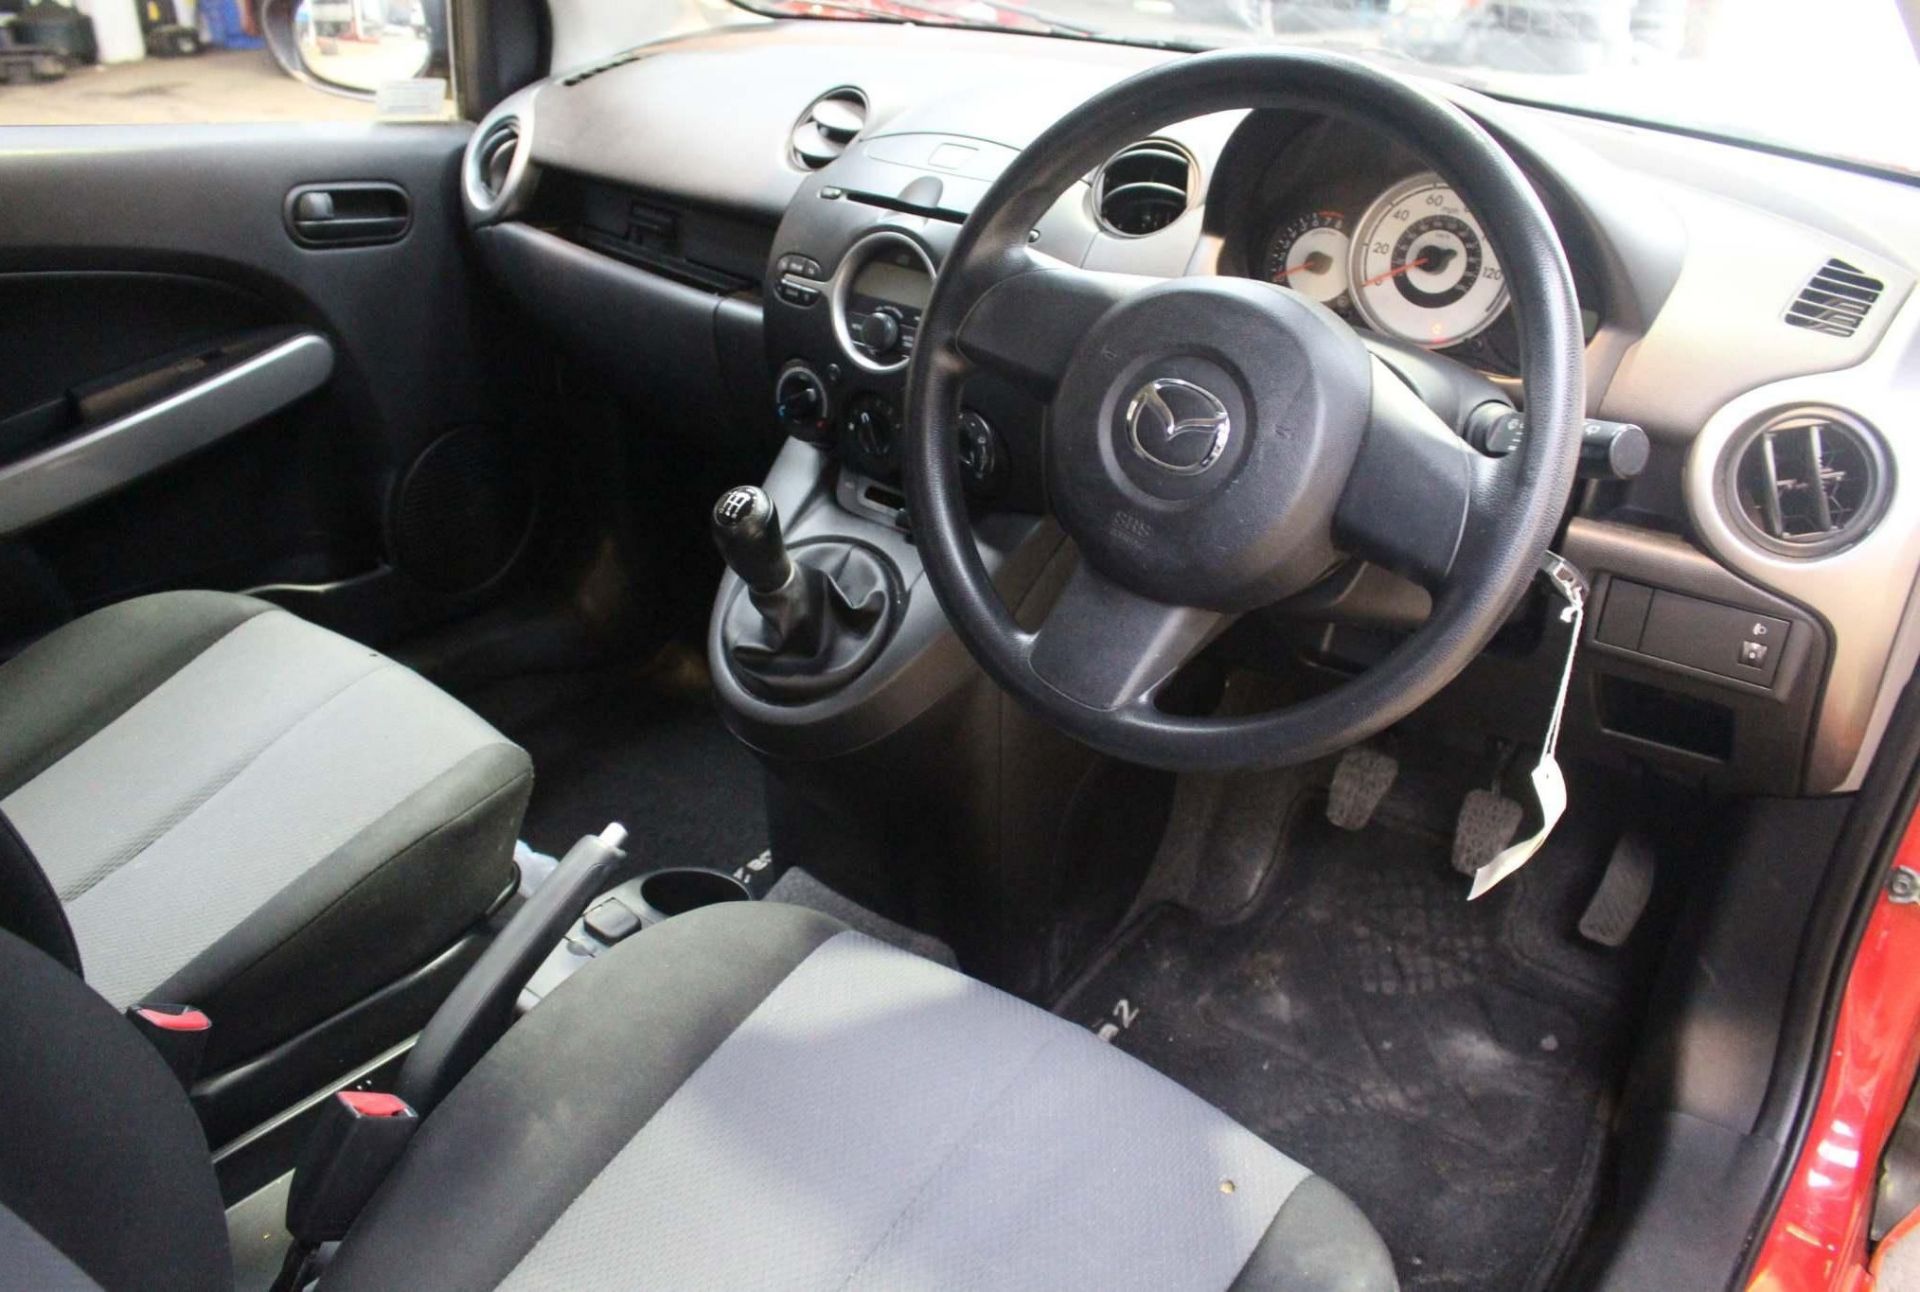 2010 Mazda2 1.3 TS 3Dr Hatchback - CL505 - NO VAT ON THE HAMMER - Location: Corby, Northamptonshire< - Image 12 of 17